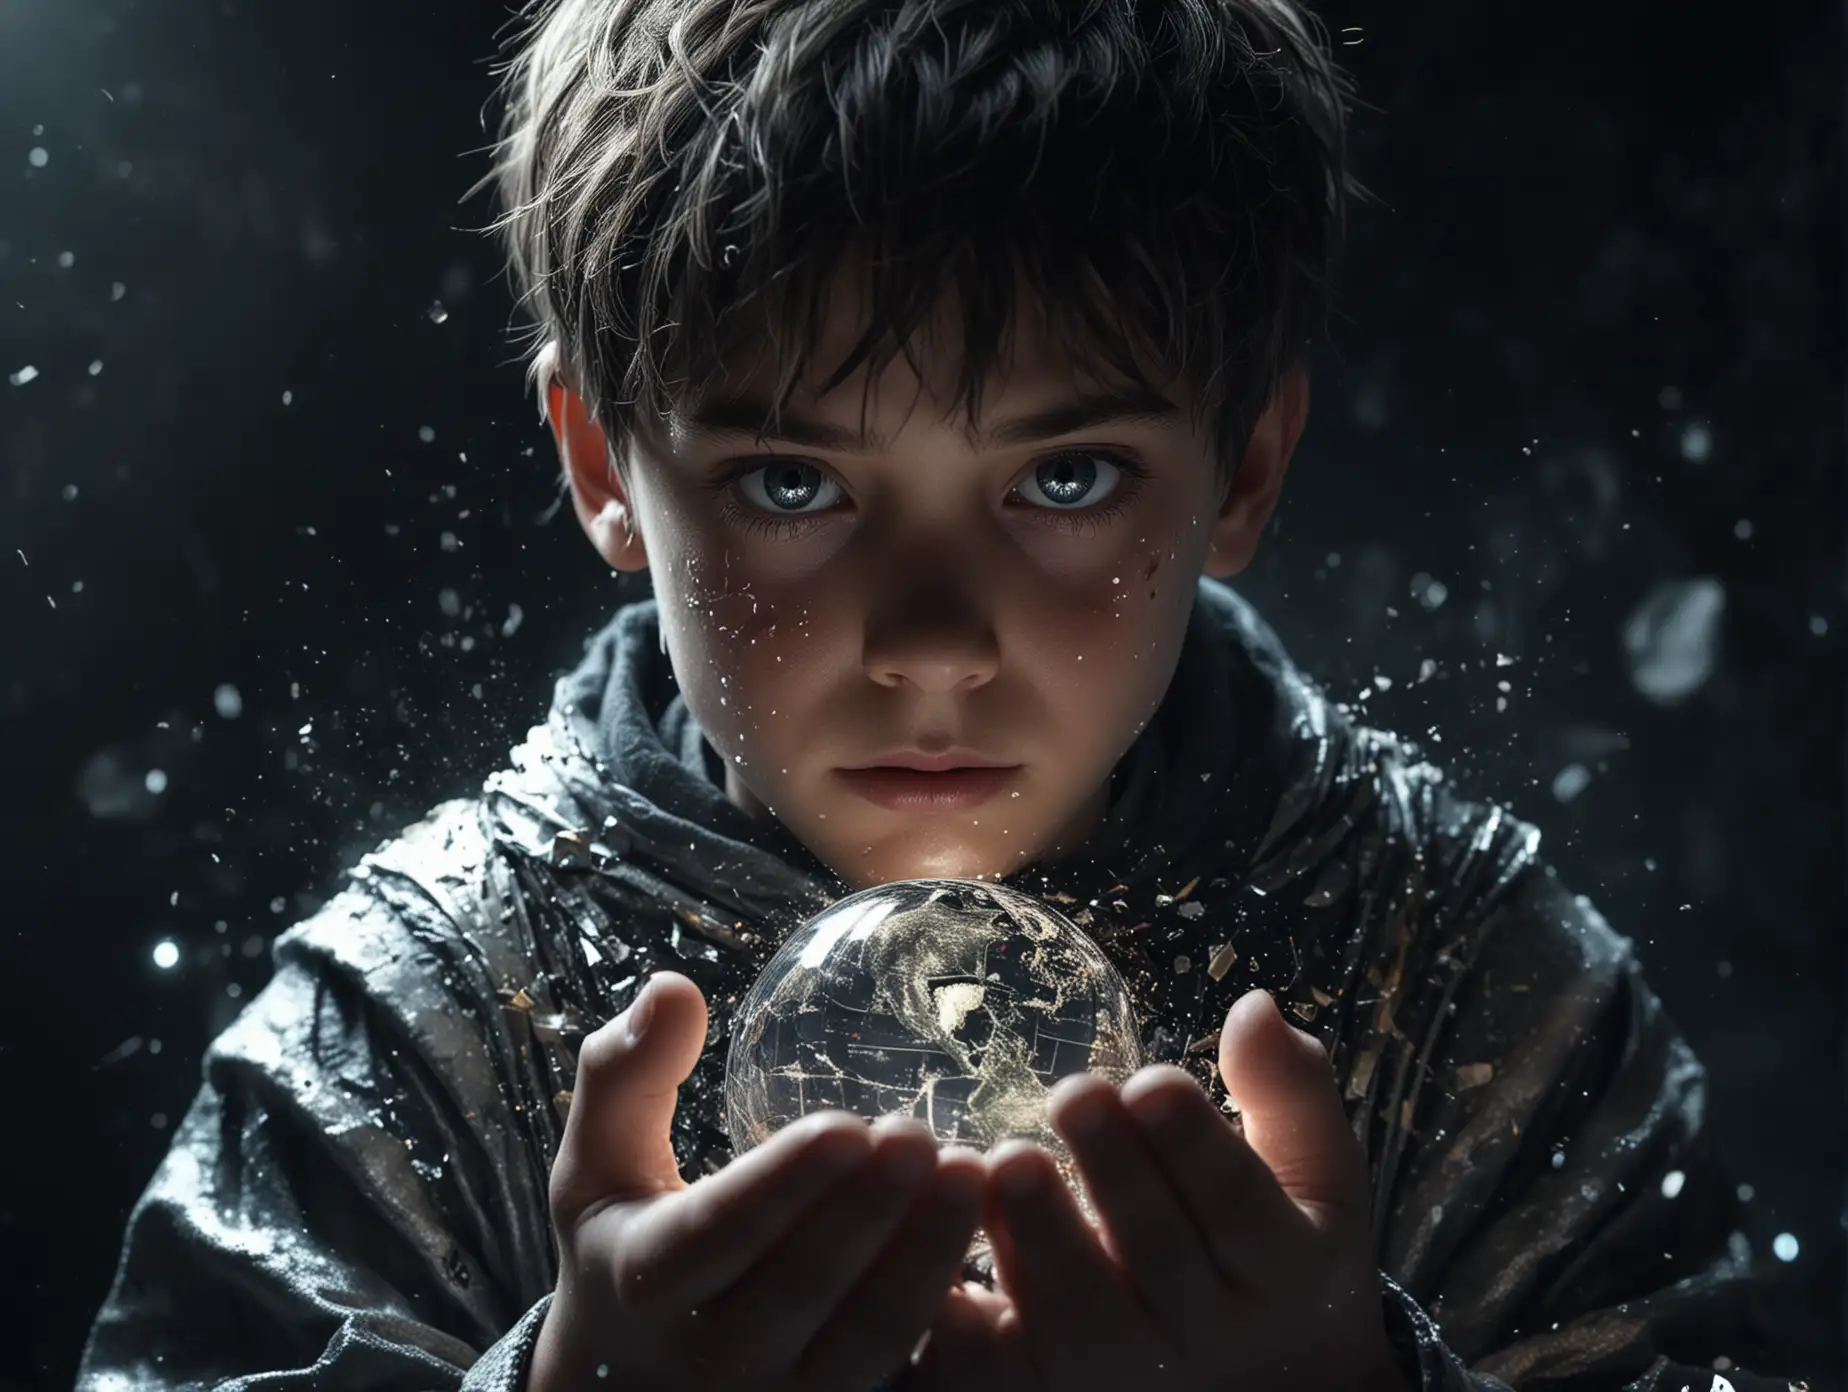 Cryptic-Boy-Holds-Shattered-Earth-in-Hands-Against-Dark-Background